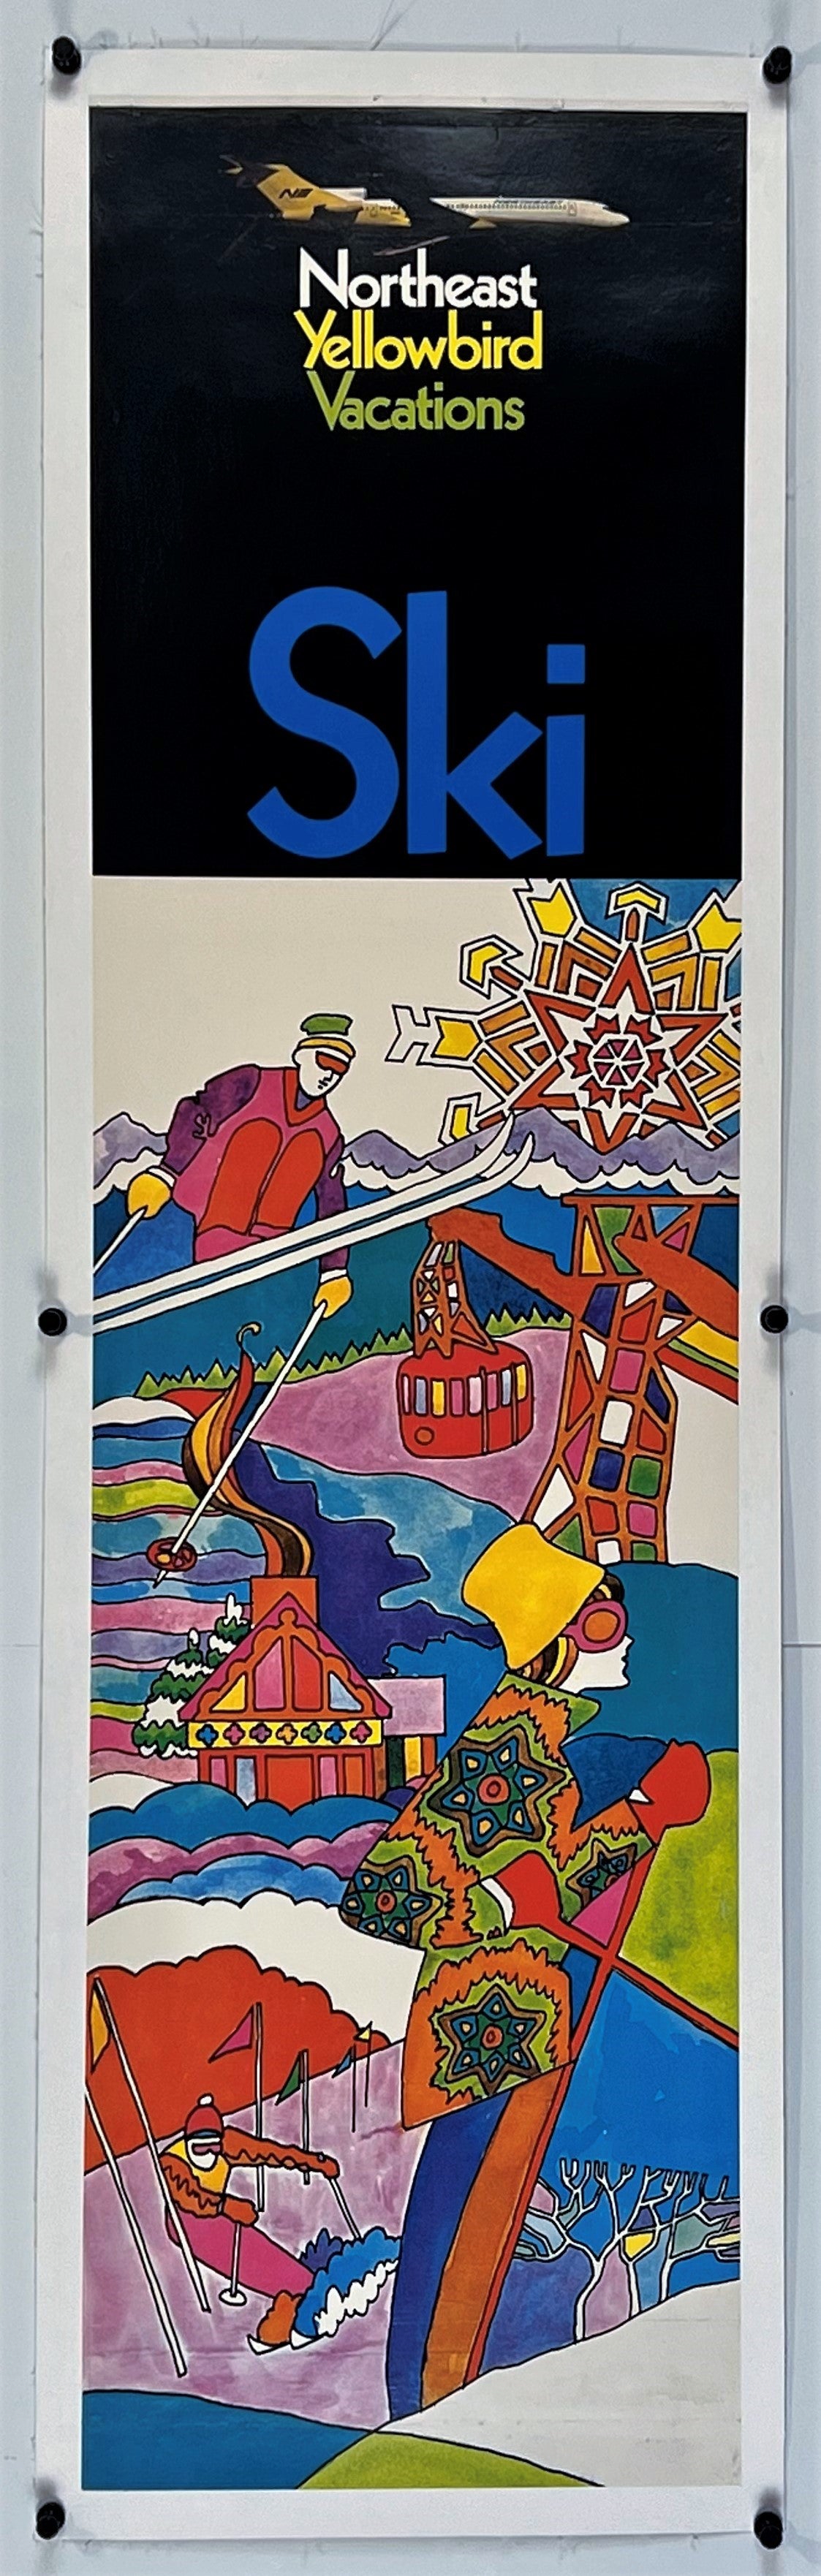 Yellowbird Vacations- Ski - Authentic Vintage Poster